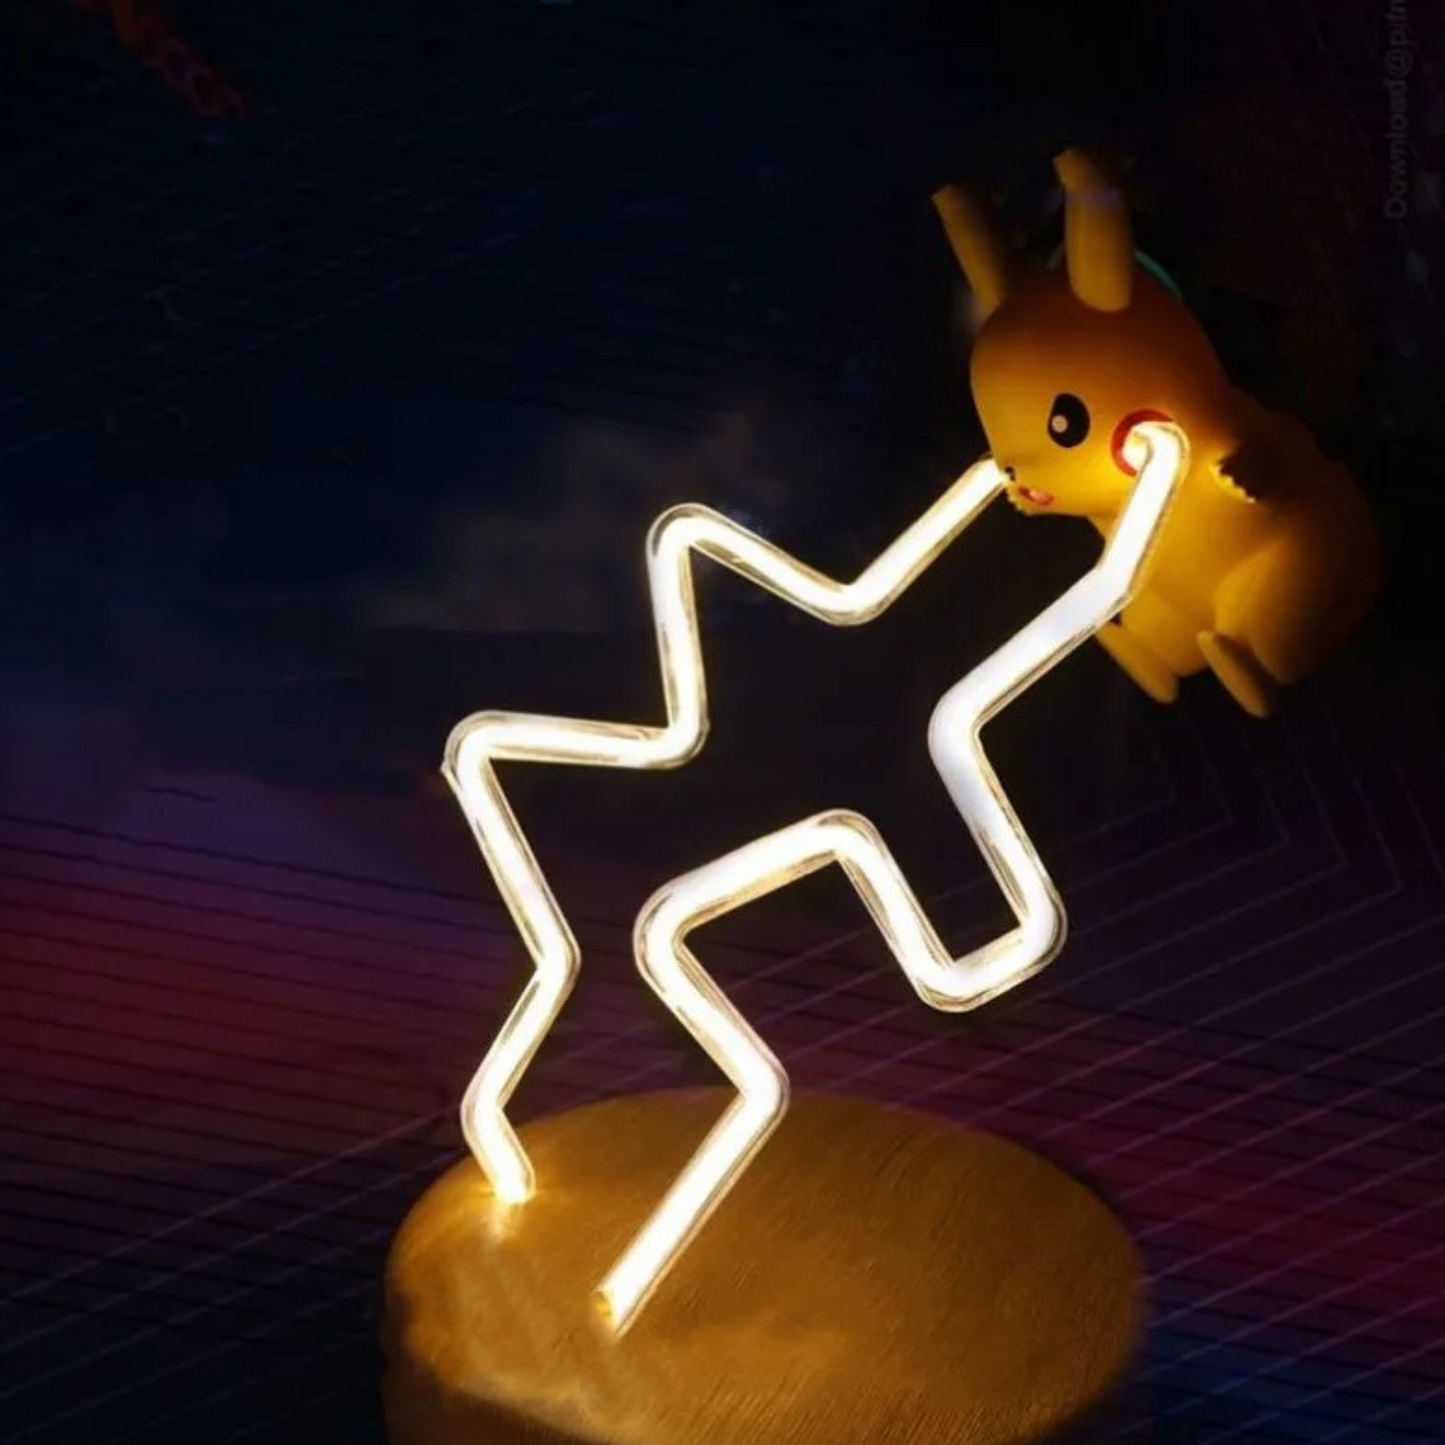 Dark - Pikachu Pokemon wireless charger with thunderbolt lightning LED lights | Perfect as a night light lamp decor gift for Pokémon fans.